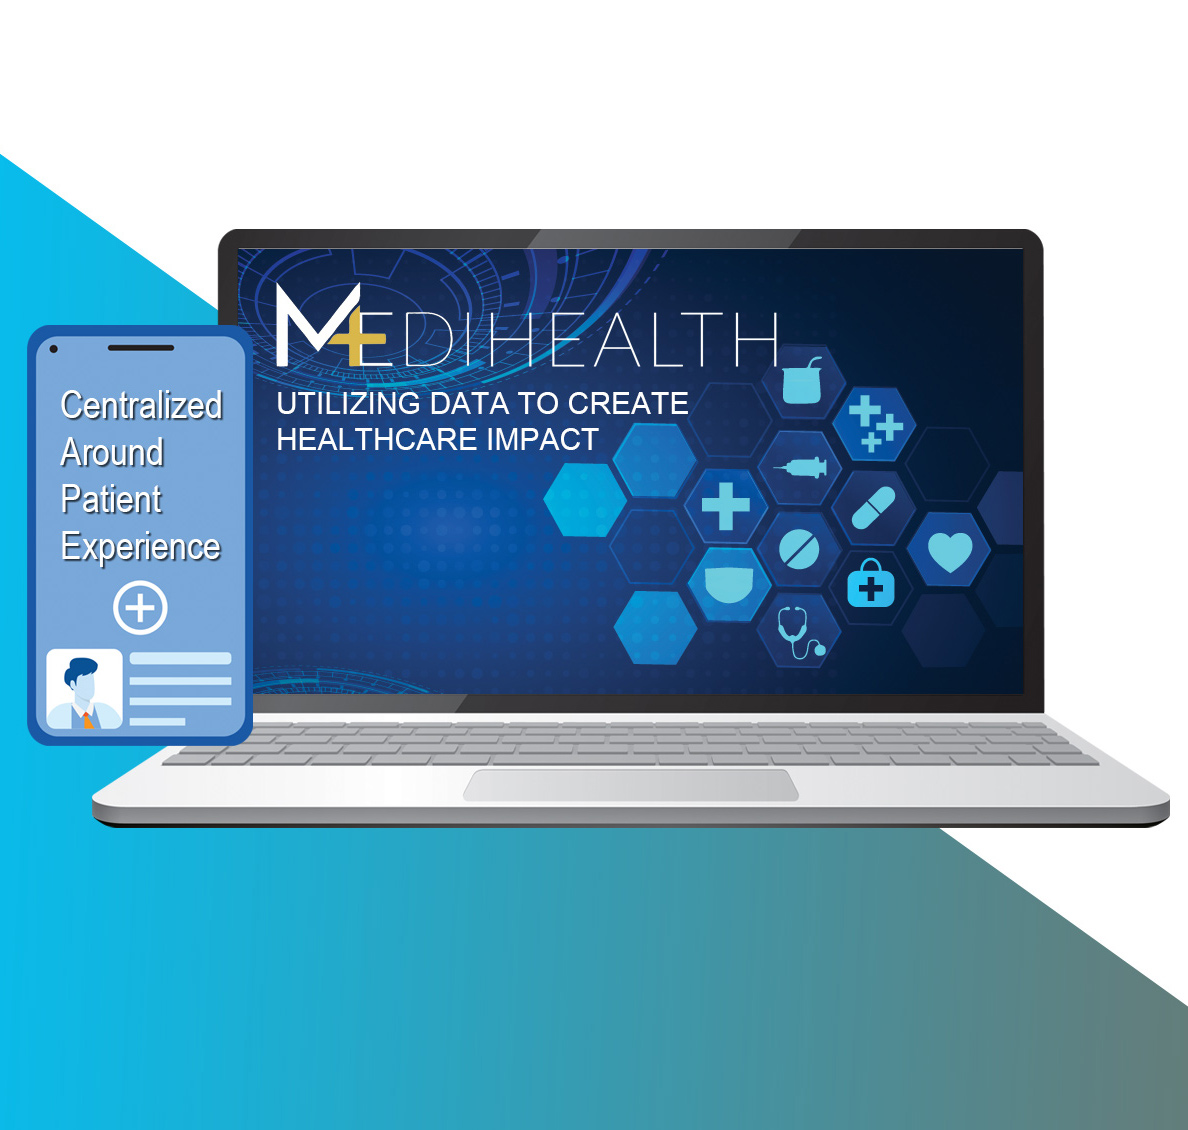 Medihealth Centralized around patient experience